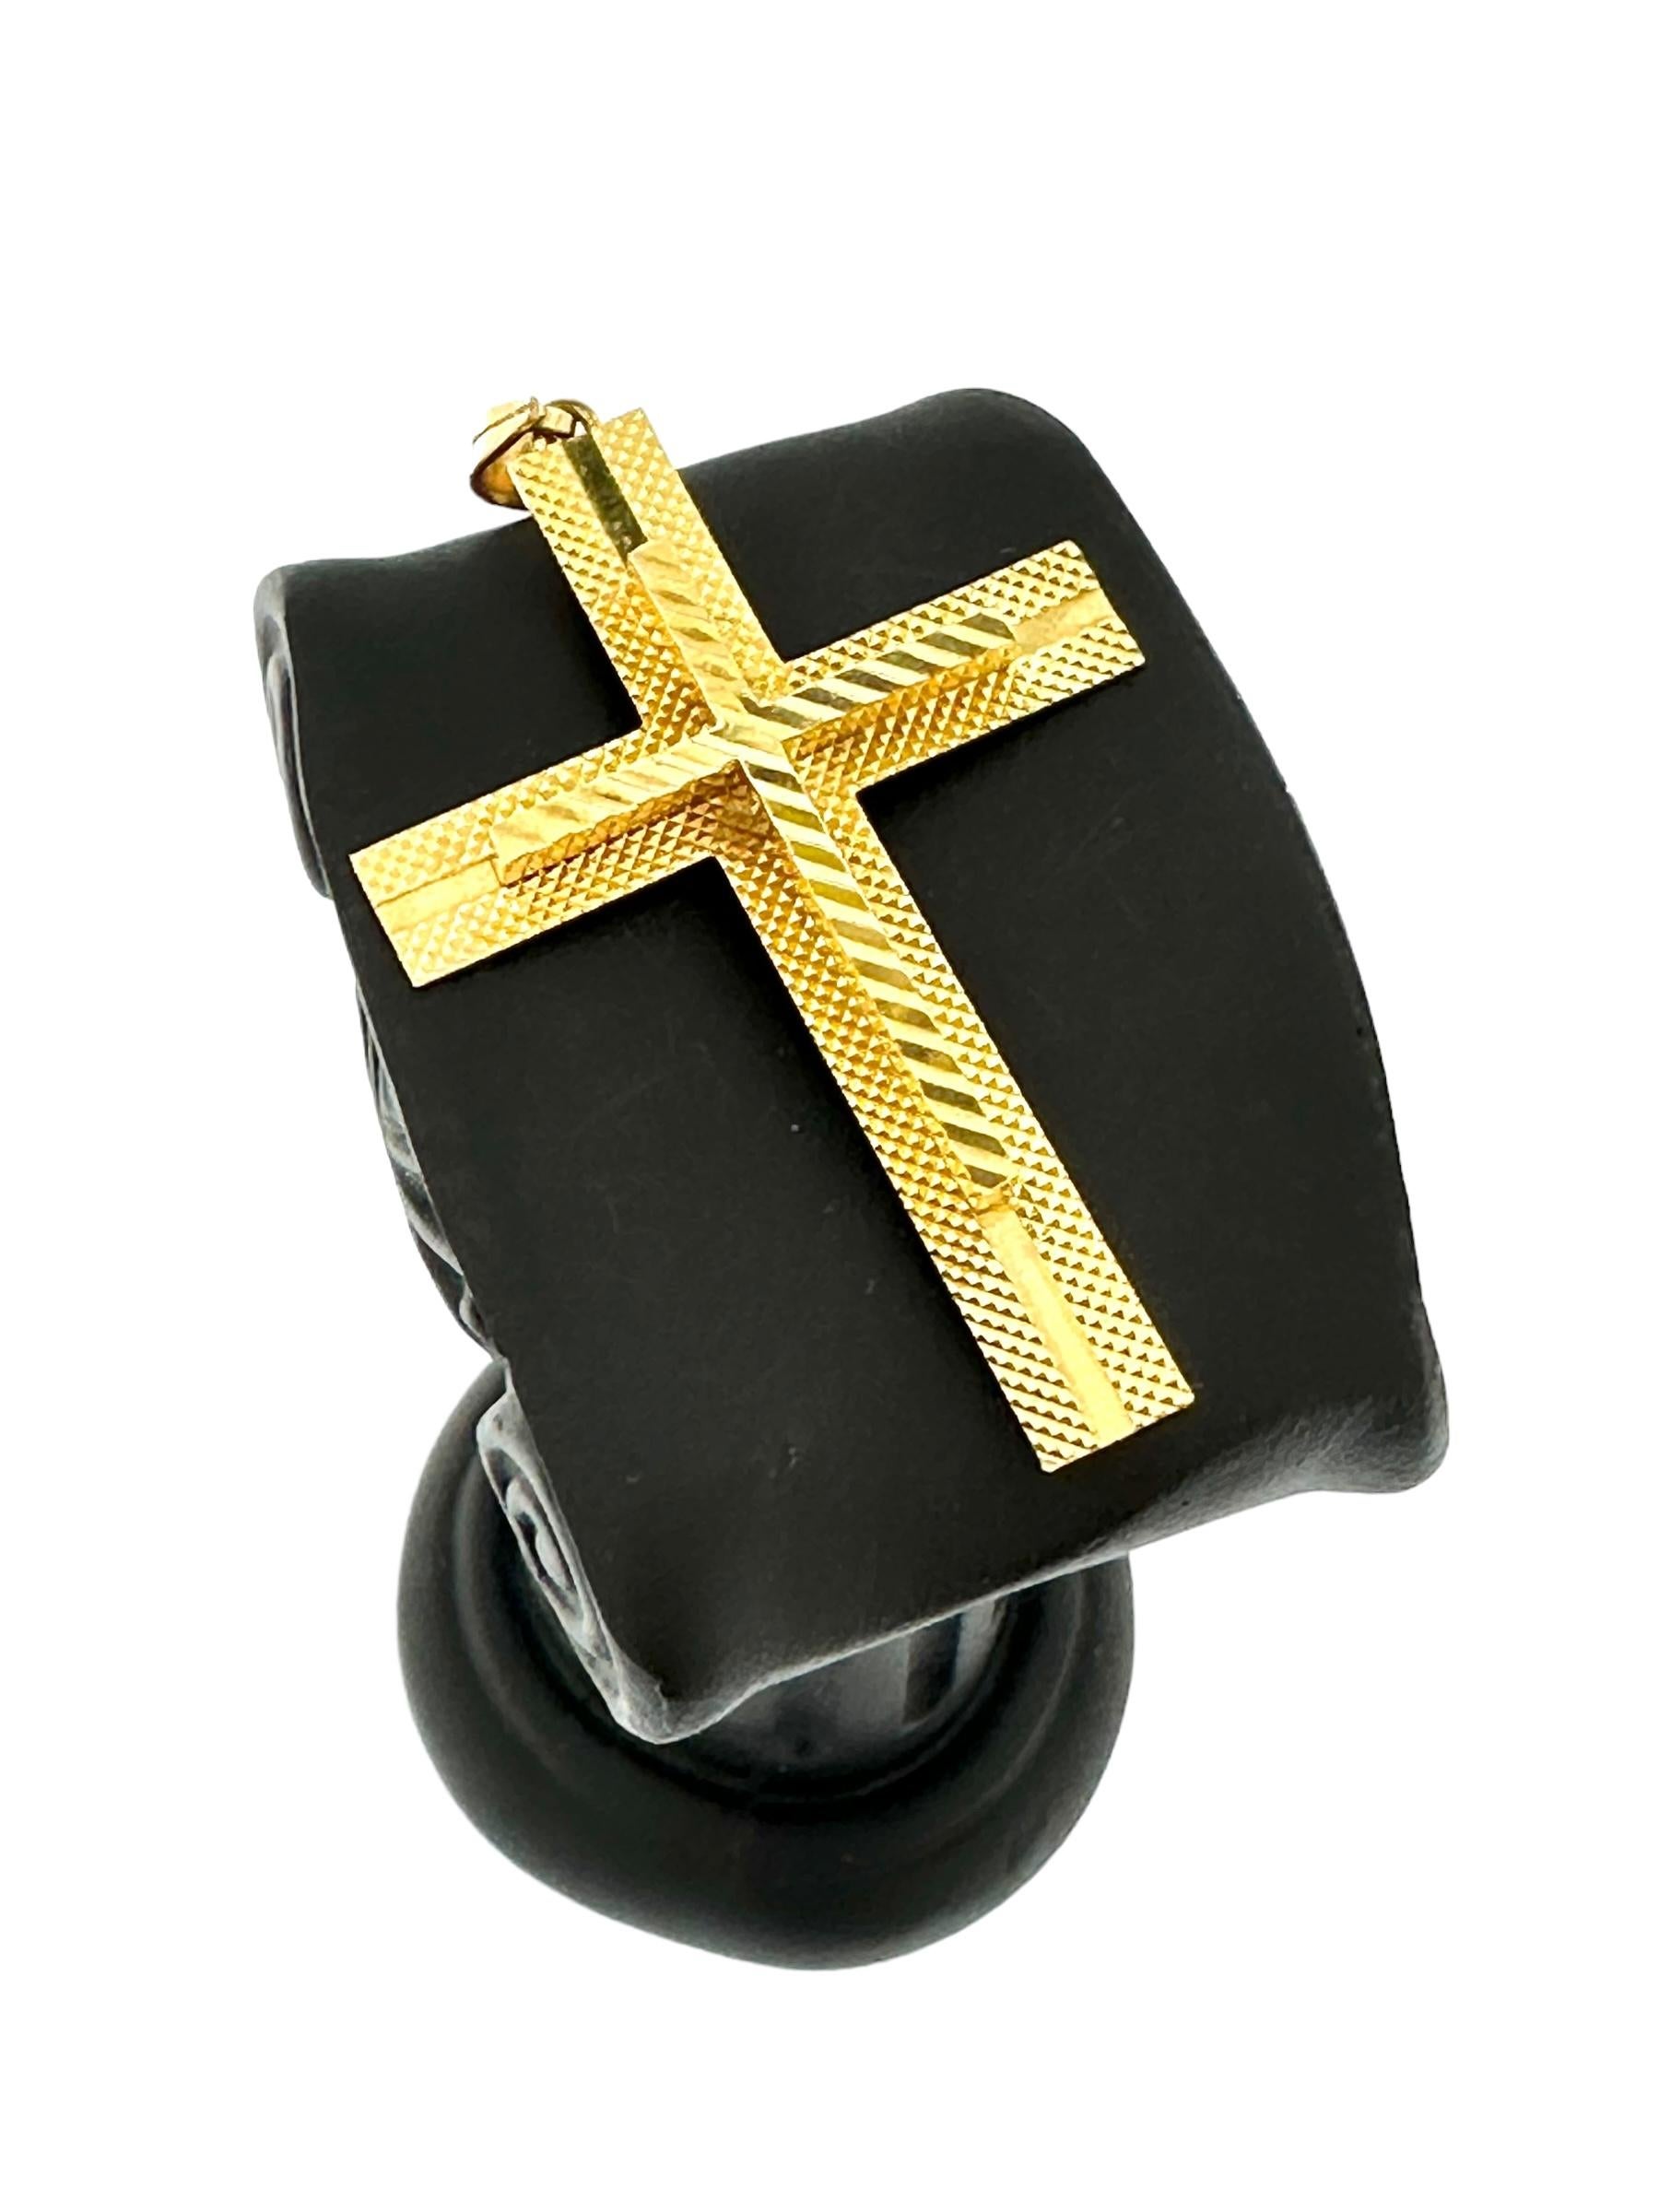 The Vintage Spanish Cross in 18 karat Yellow Gold is a striking piece of jewelry that carries both religious symbolism and artistic flair. Crafted from luxurious 18-karat yellow gold, this cross pendant exudes warmth and elegance.

At the center of